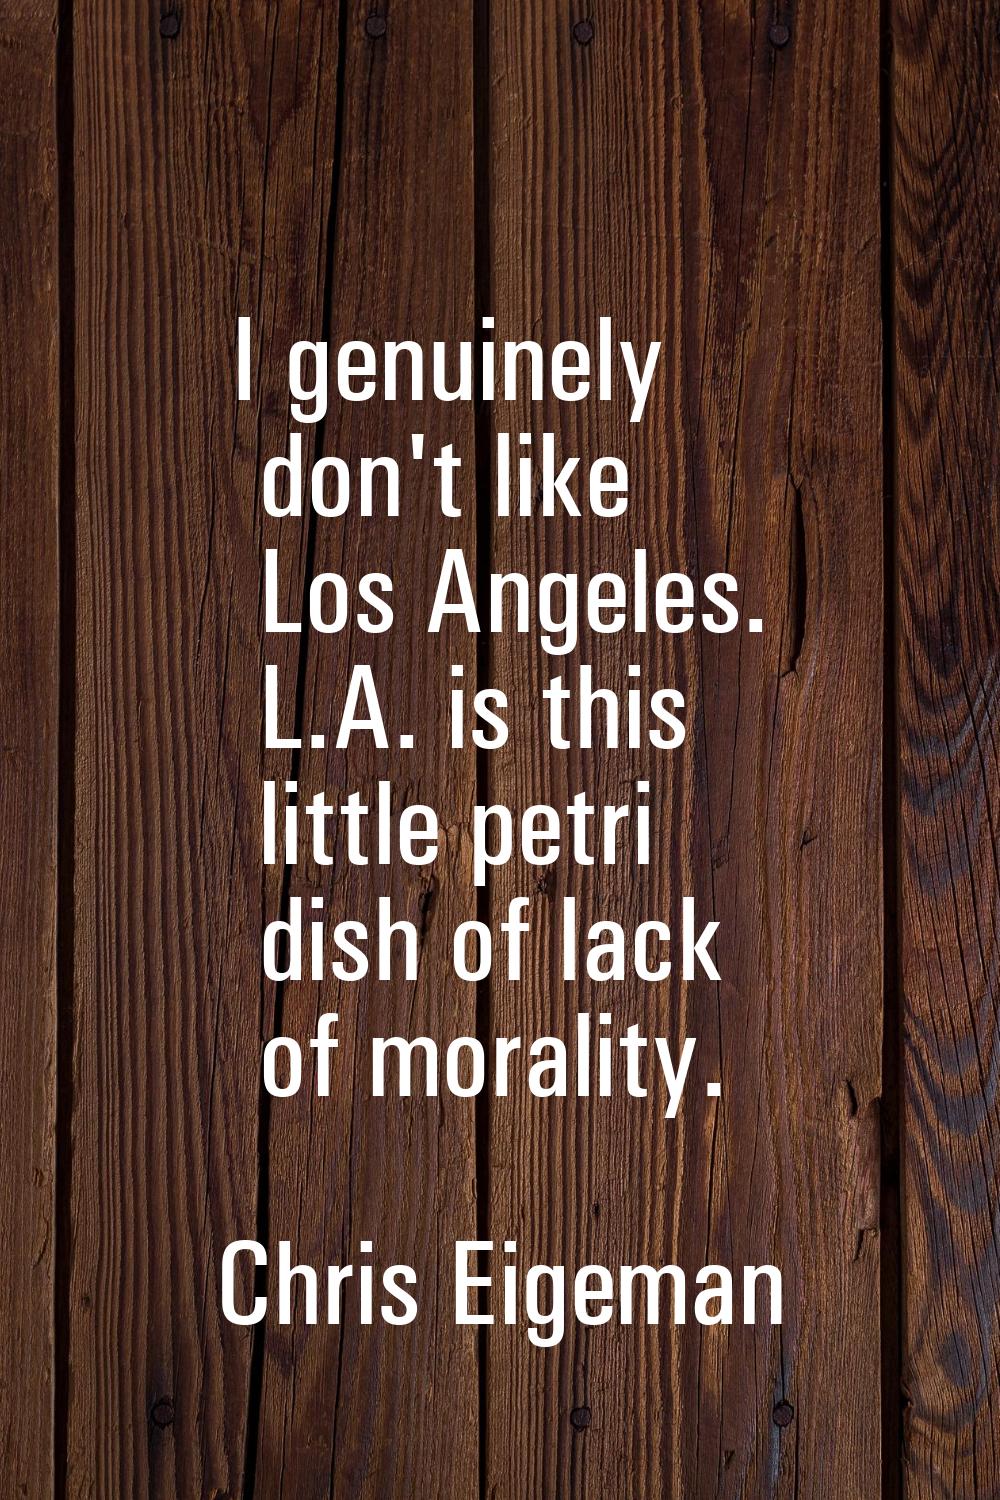 I genuinely don't like Los Angeles. L.A. is this little petri dish of lack of morality.